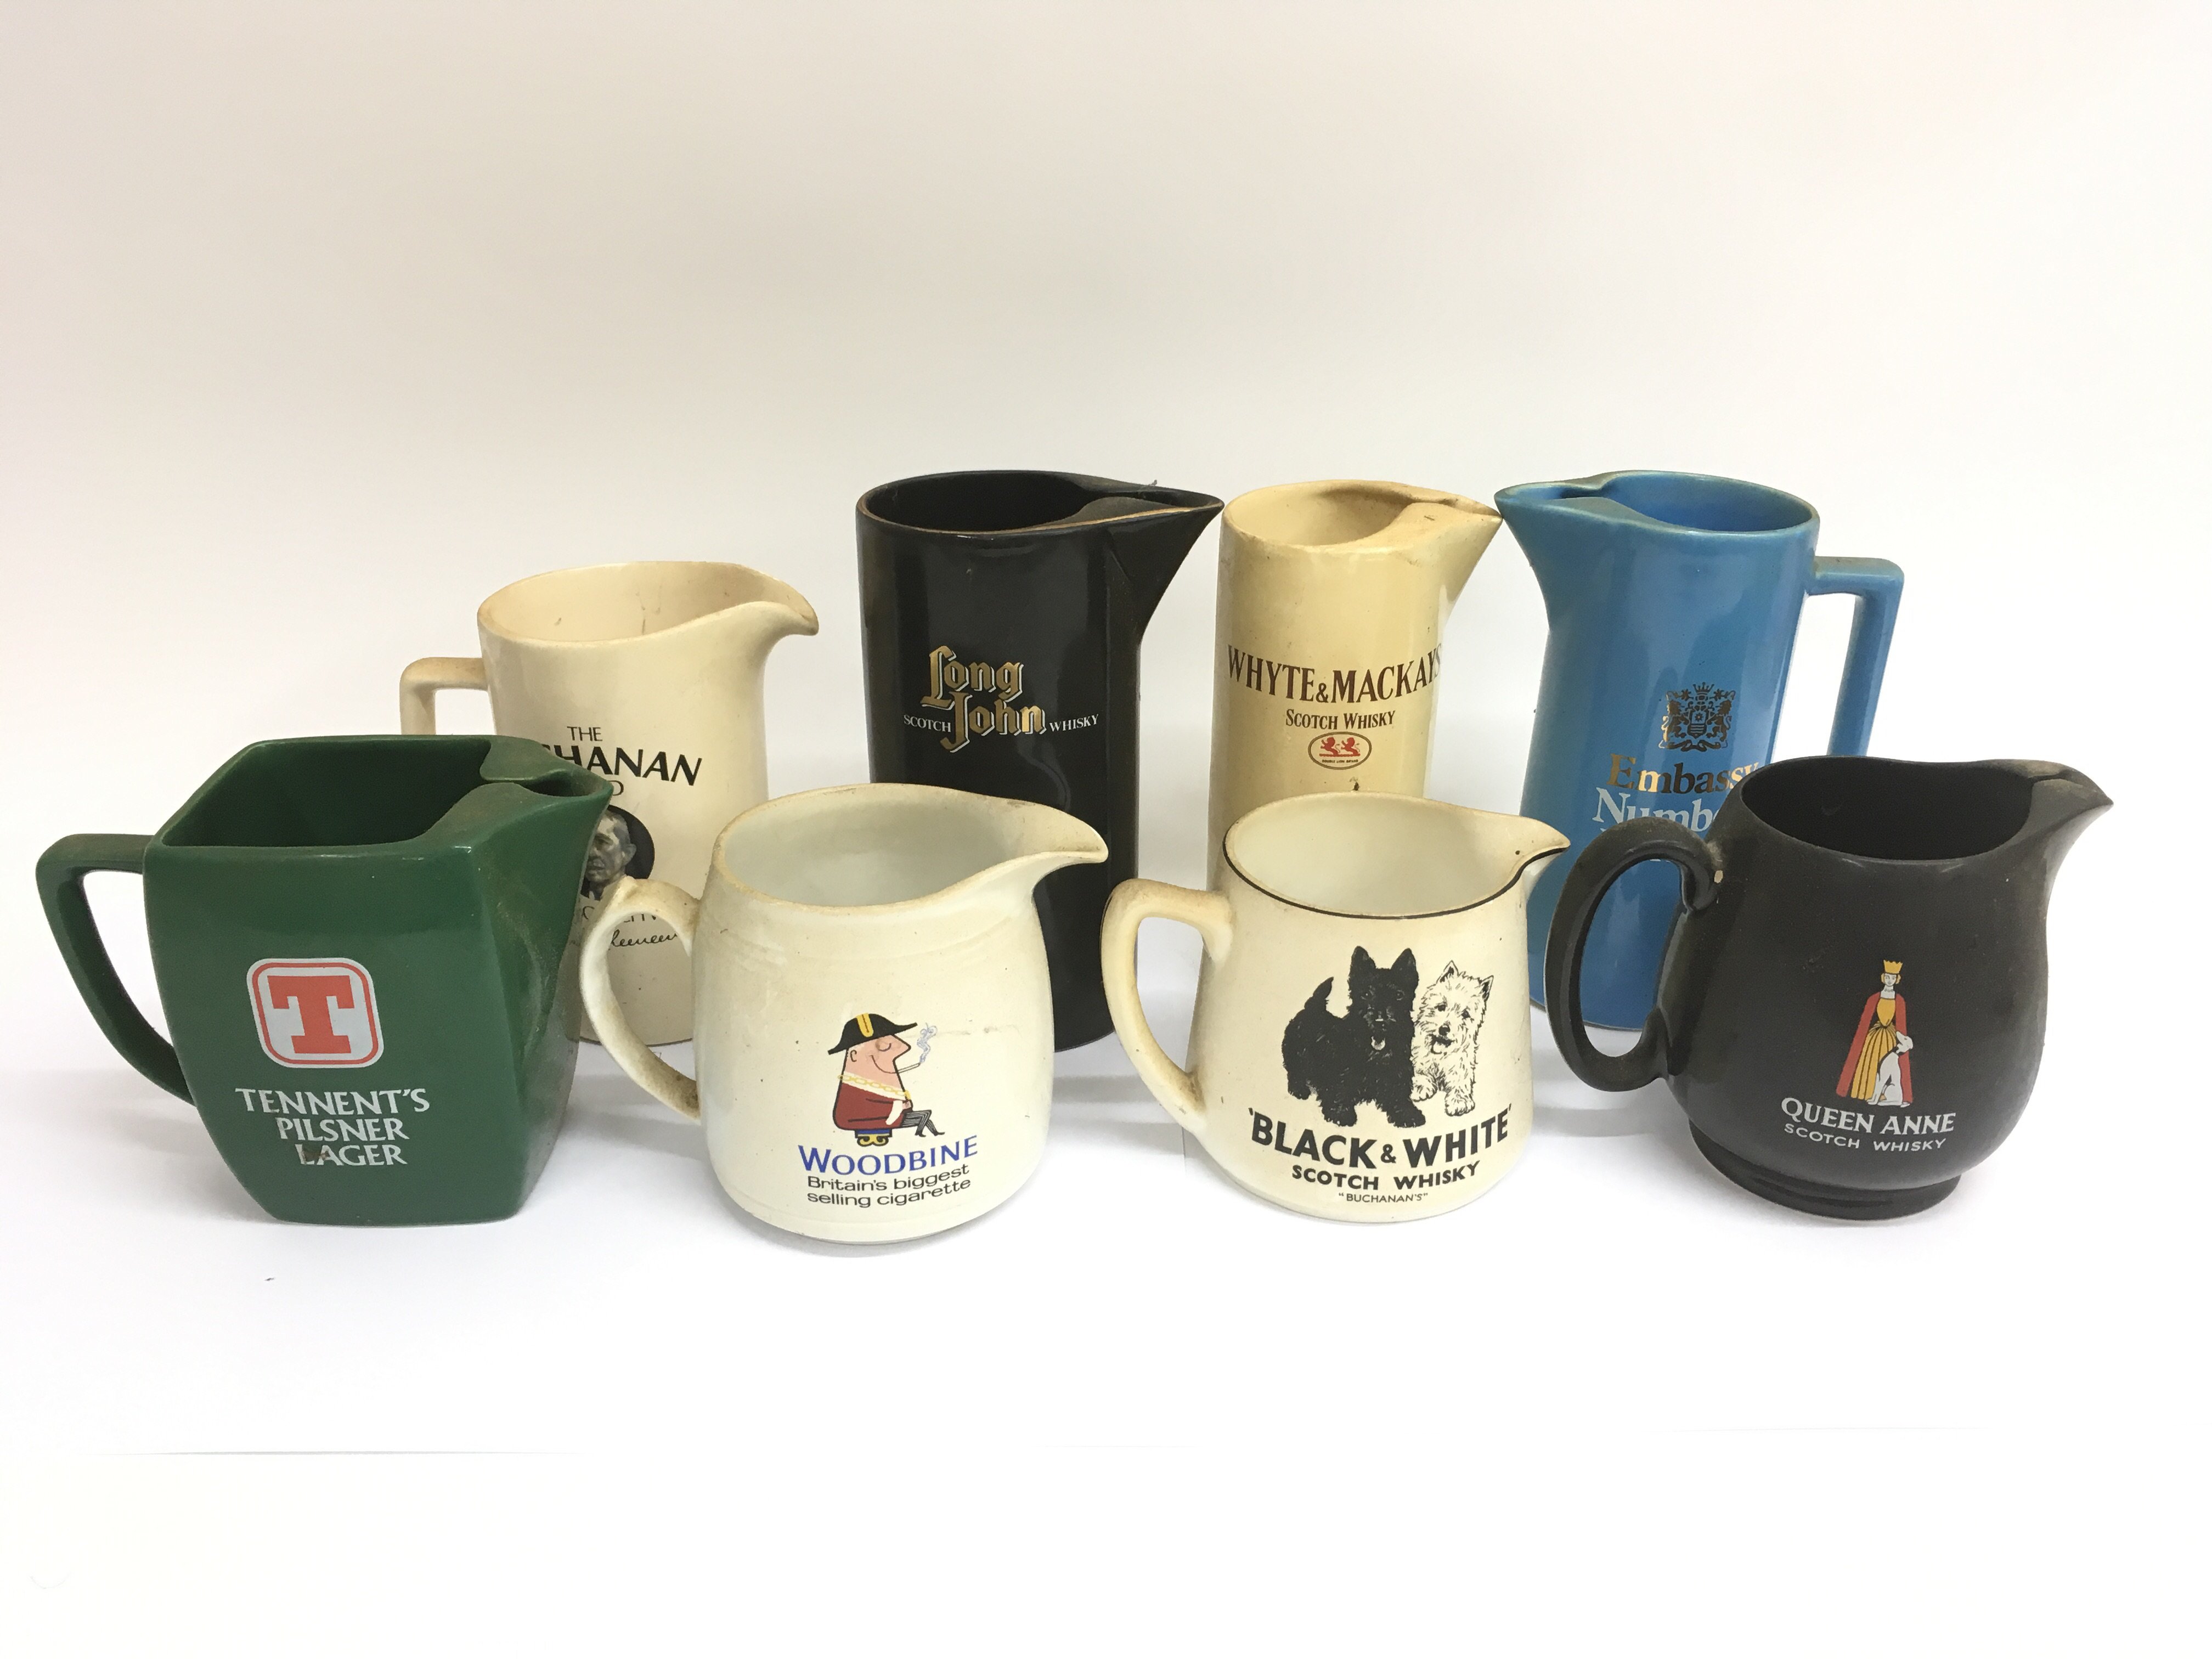 A collection of mostly breweriania decorated ceramic jugs, including a Black & White scotch whisky